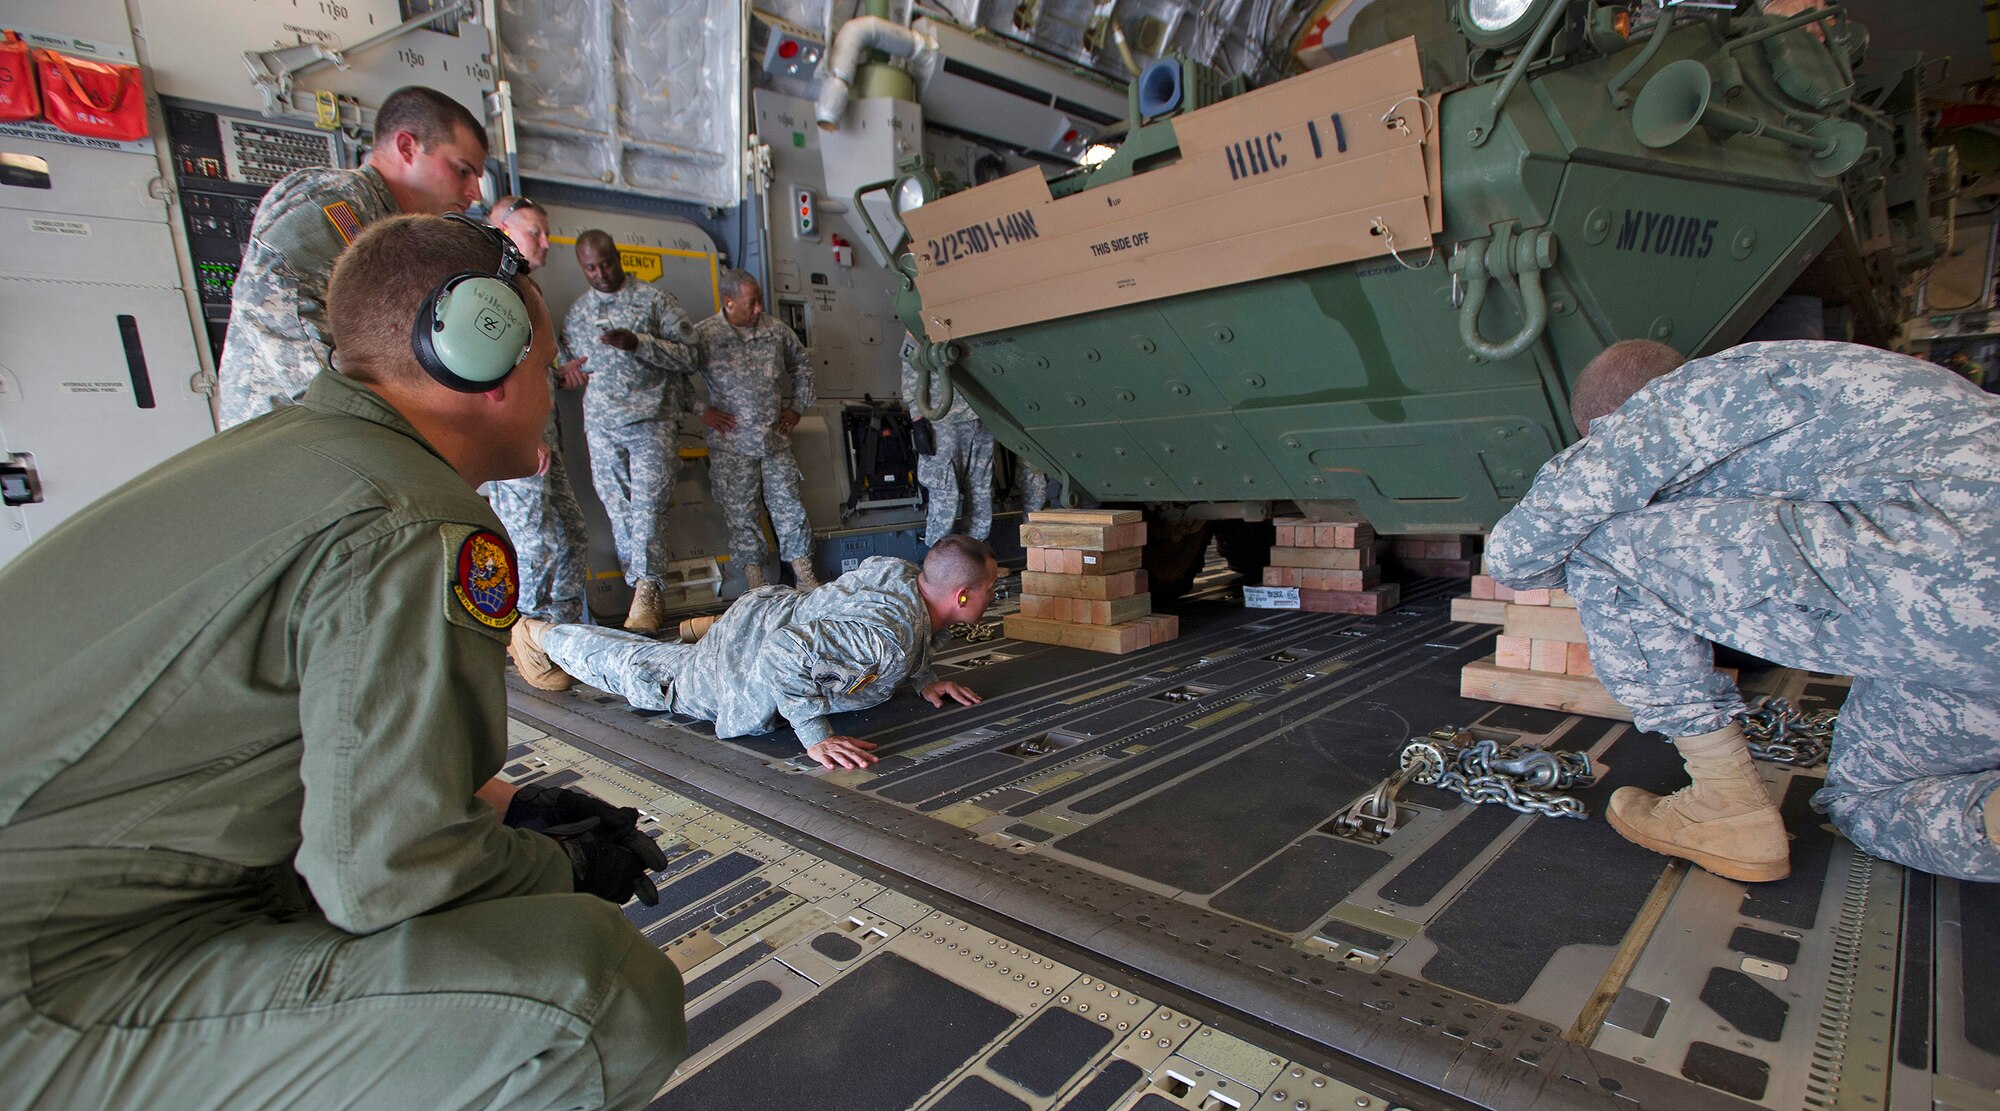 Senior Airman Jacob Willenborg (left), 535th Airlift Squadron loadmaster, helps secure the load of a Stryker medical evacuation vehicle assigned to the 1st Battalion, 14th Infantry, 2nd Stryker Brigade Combat Team, aboard a C-17 Globemaster III during a validation exercise on the flightline at Joint Base Pearl Harbor Hickam, Hawaii, Oct. 17, 2013. The Stryker is used to provide quick response maneuvering capability, enhanced survivability and lethality and expand fight versatility.  

